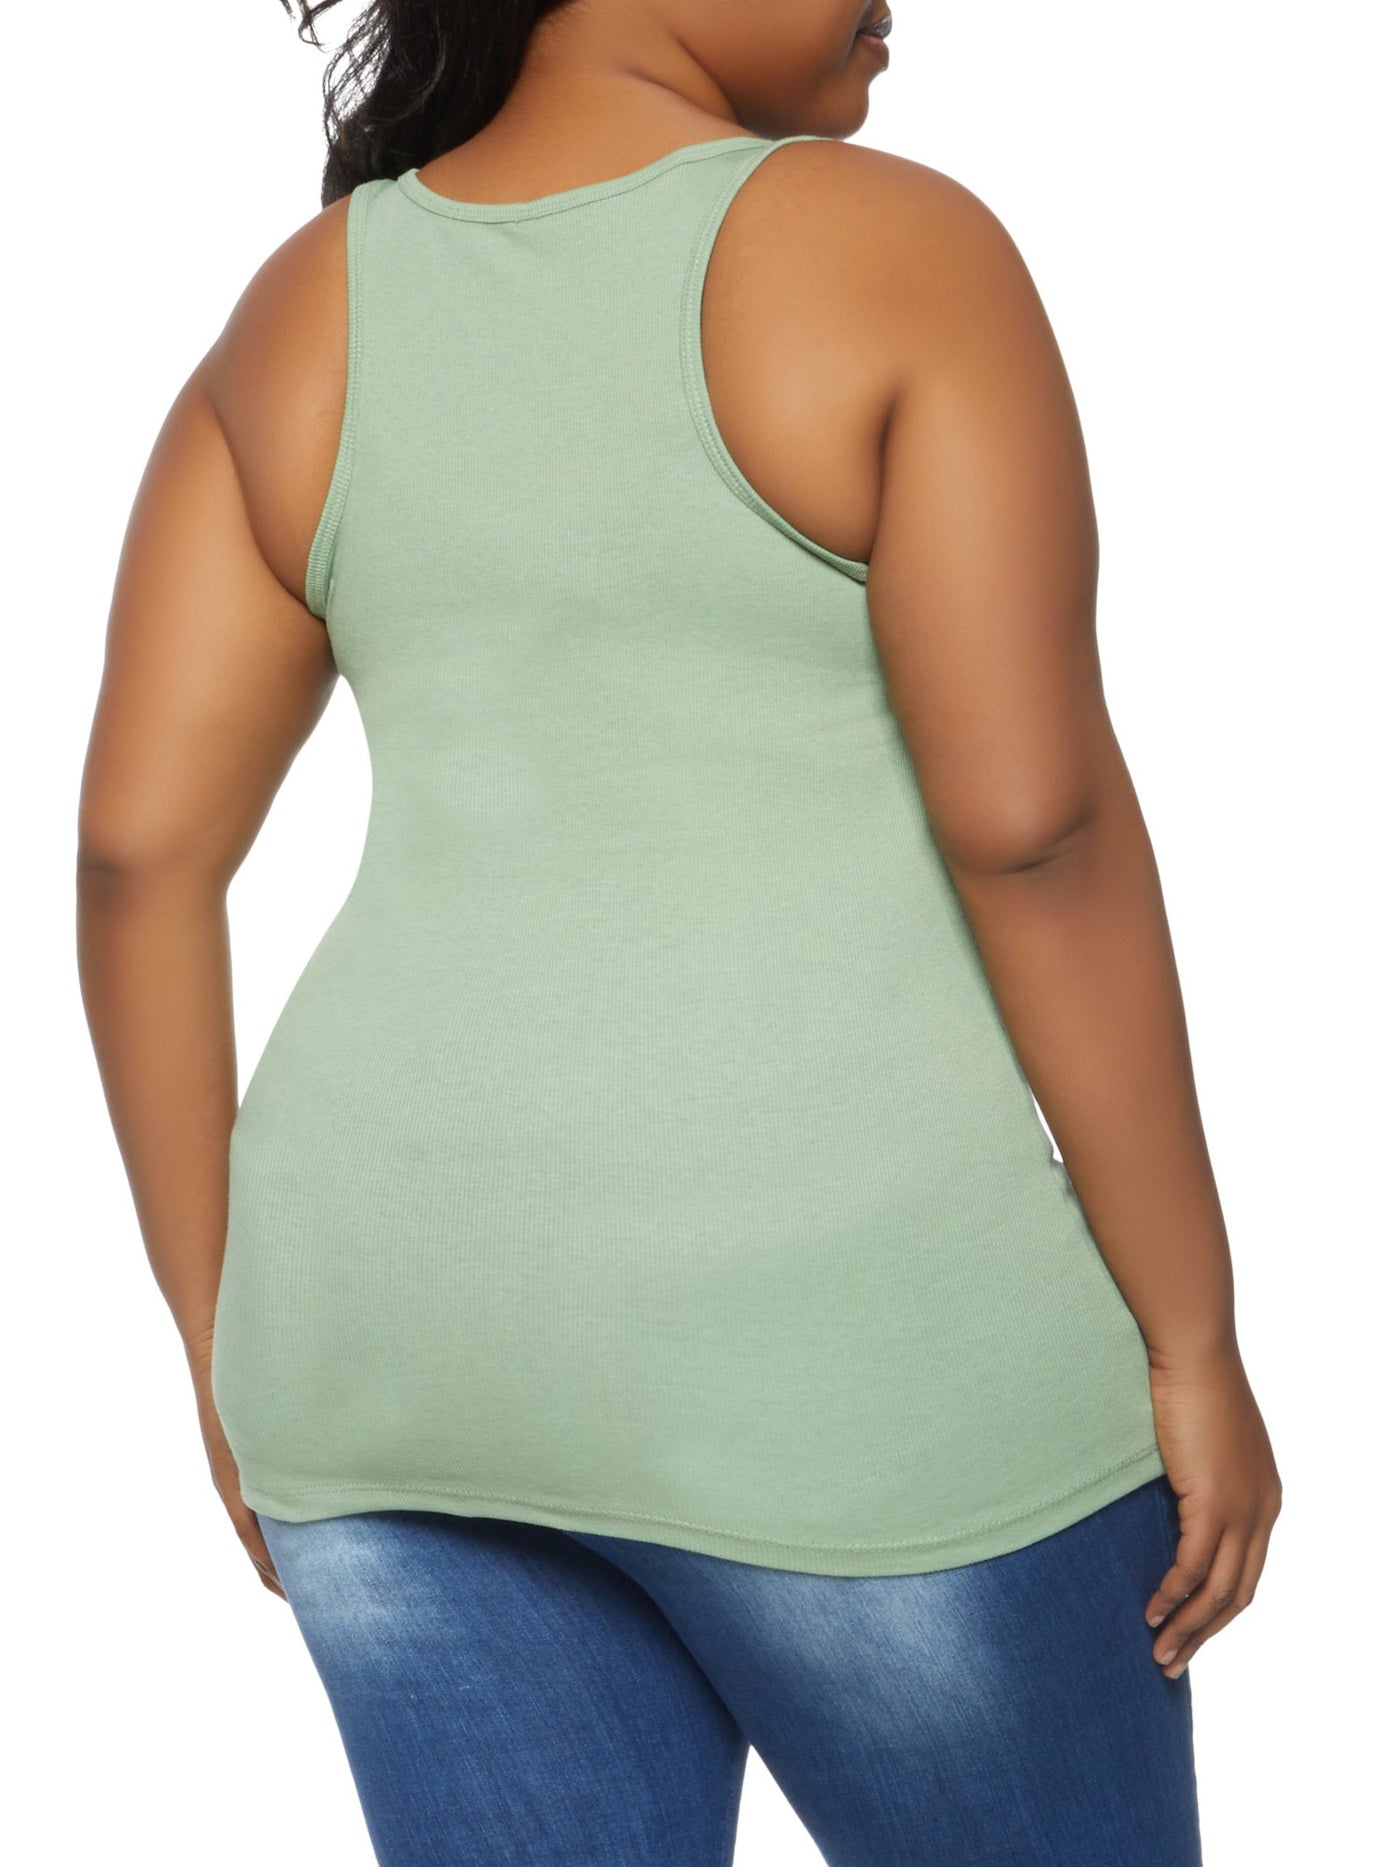 REBELLIOUS ONE Womens Green Ribbed Ruched Sleeveless Scoop Neck Tank Top Plus 2X